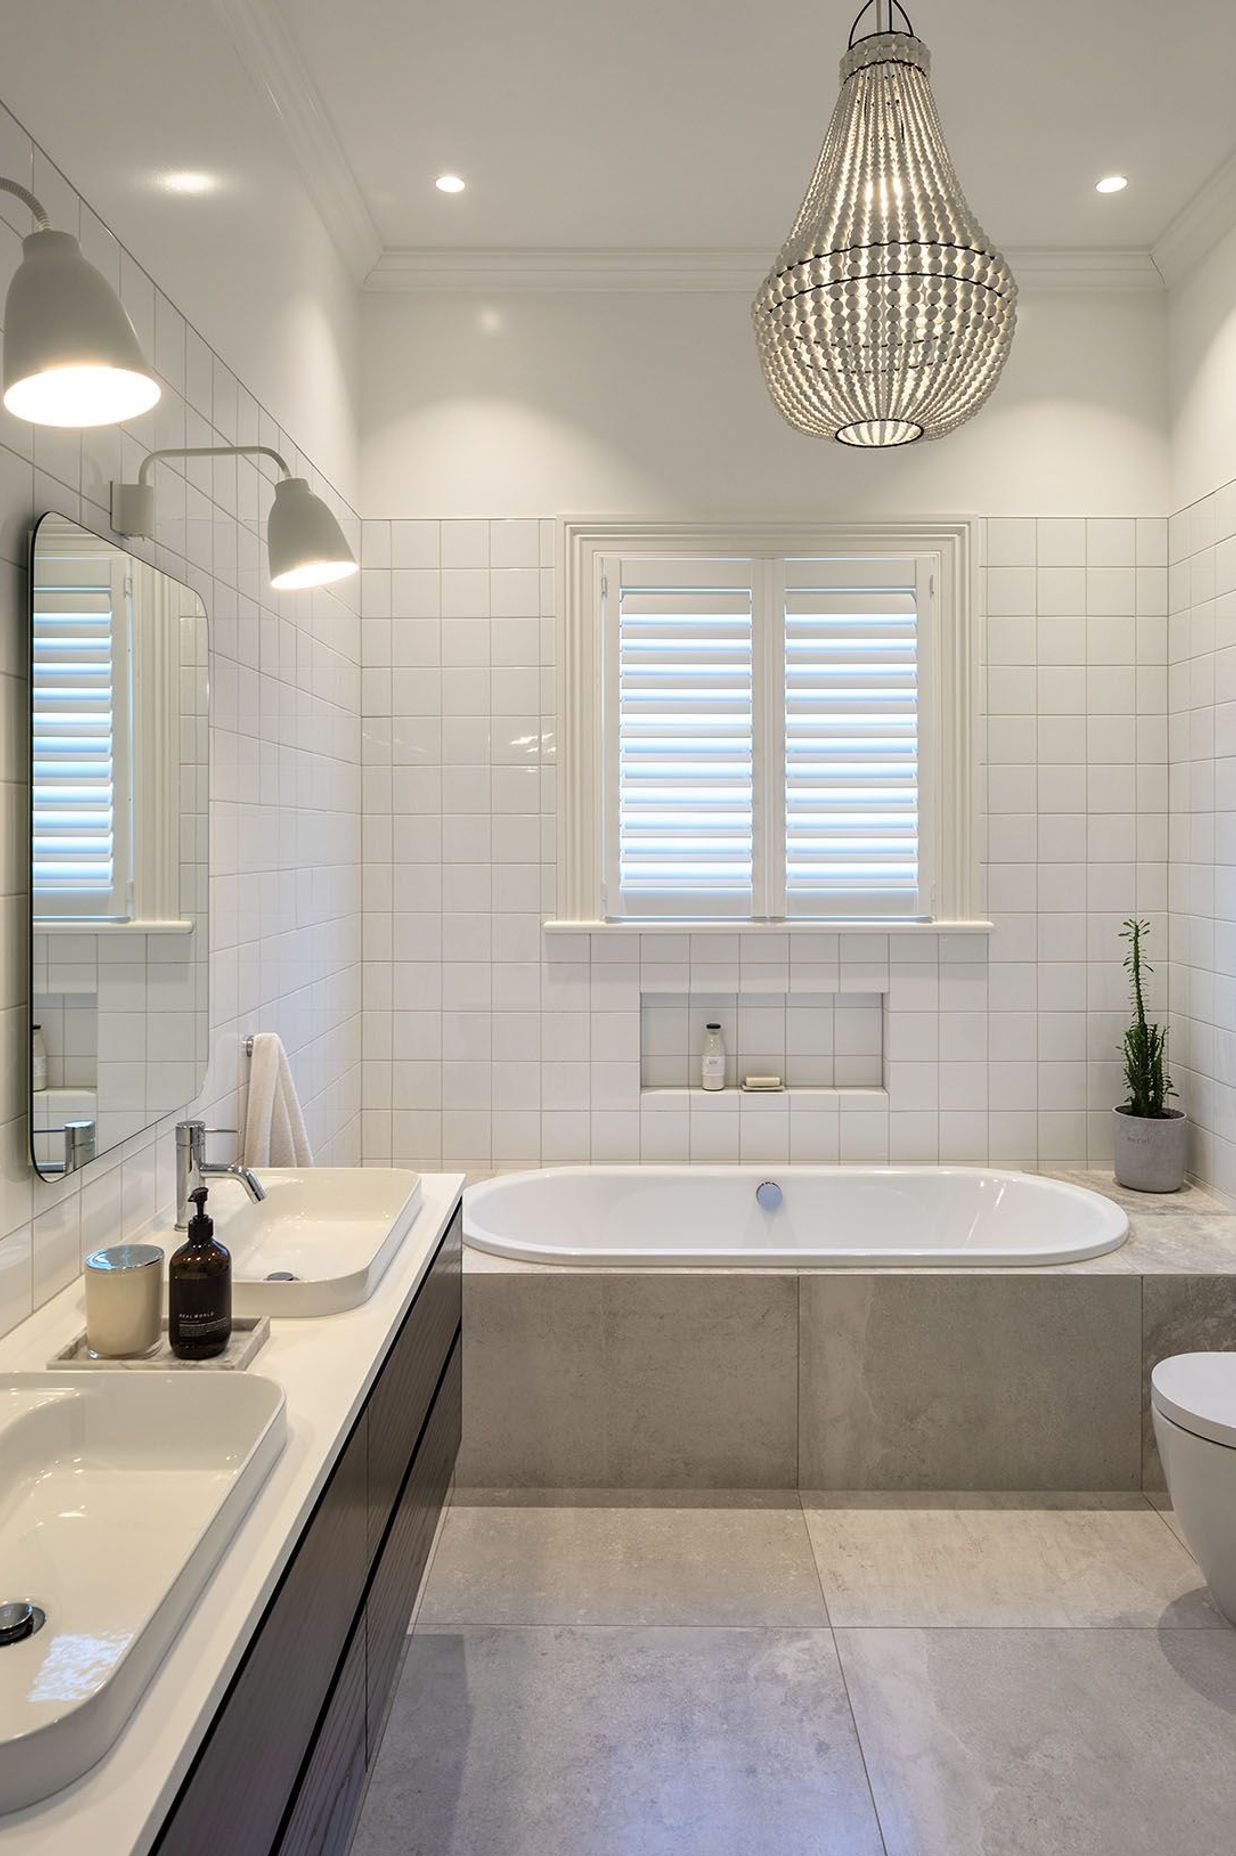 The main ensuite features modern-classic feel, in keeping with the rest of the house.